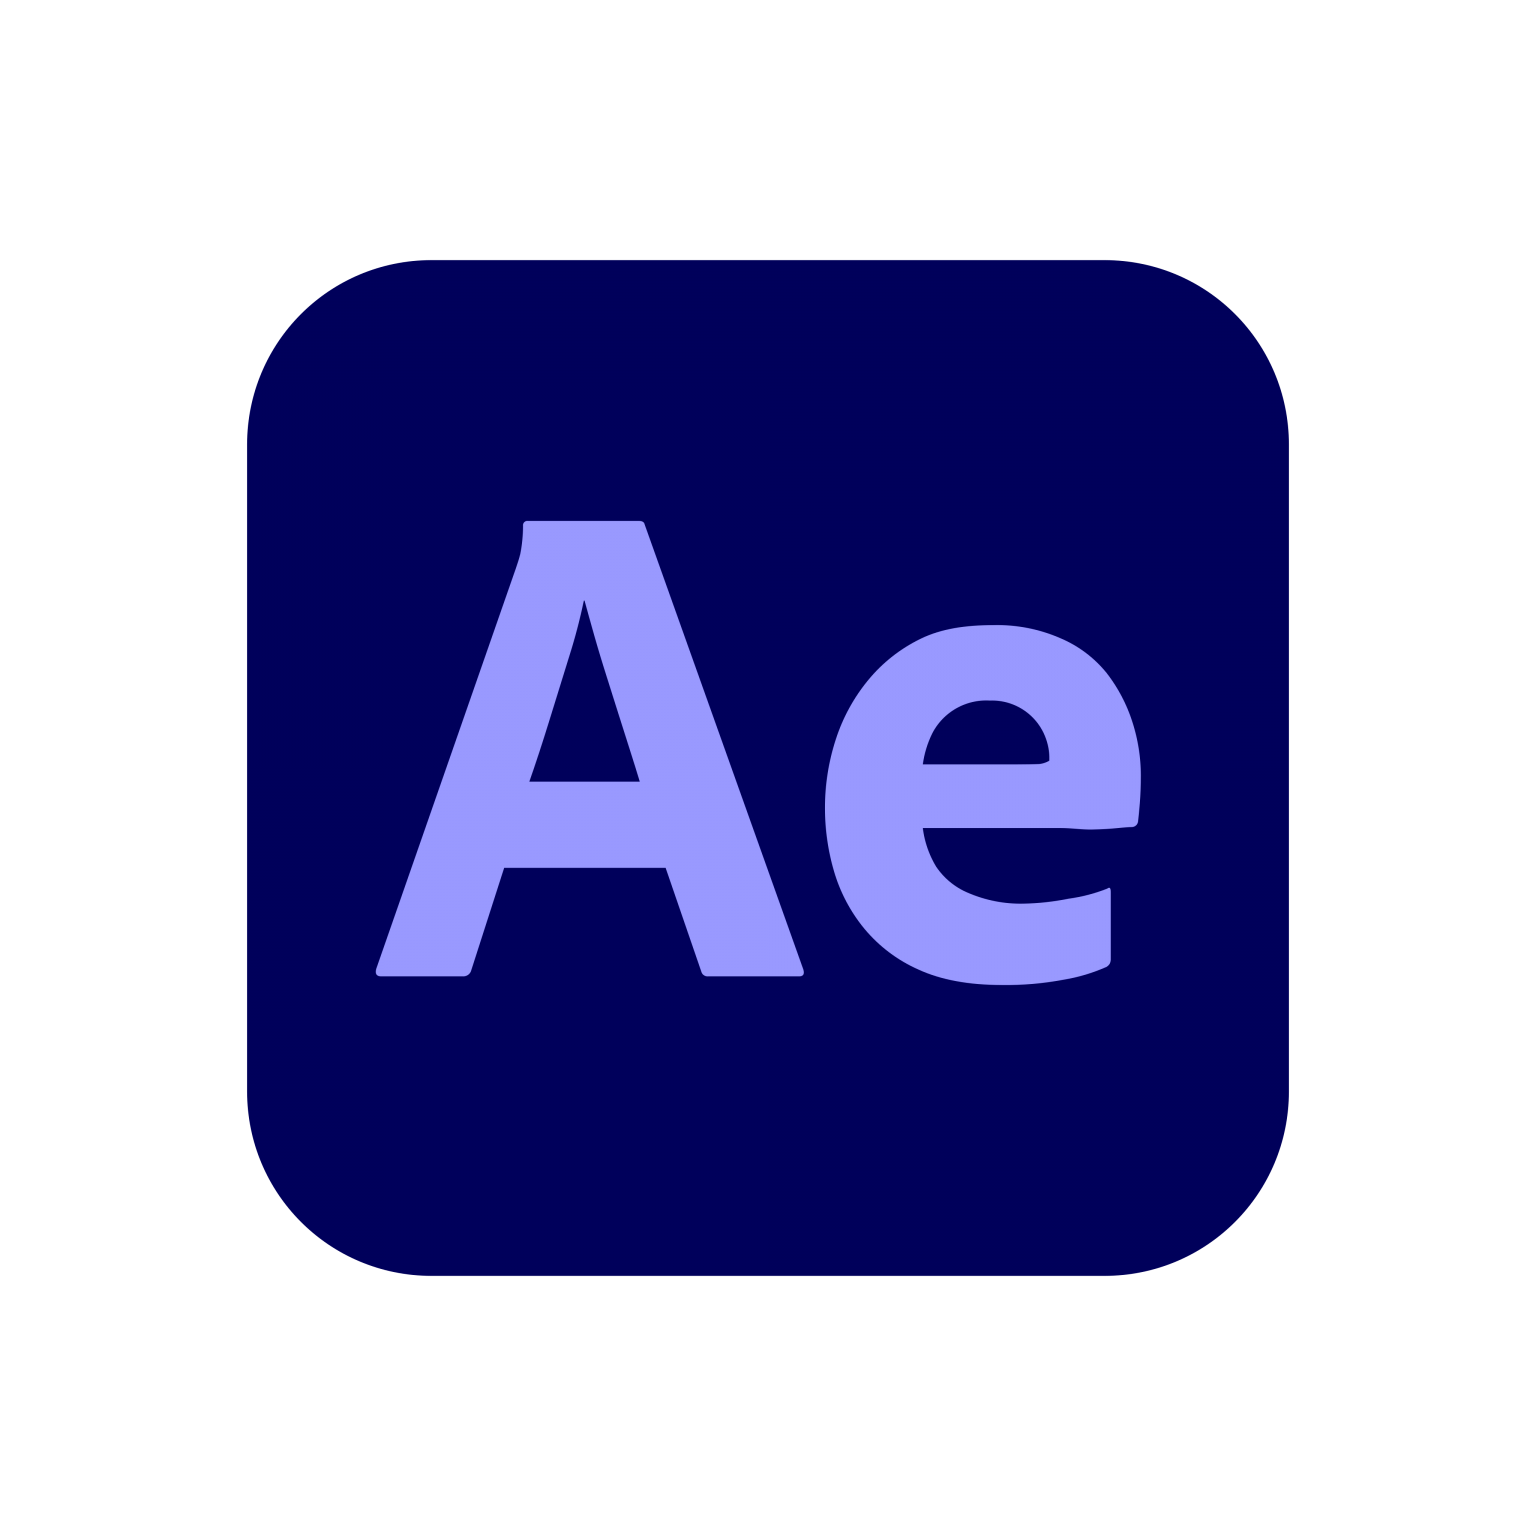 after effects transforming action logo free download